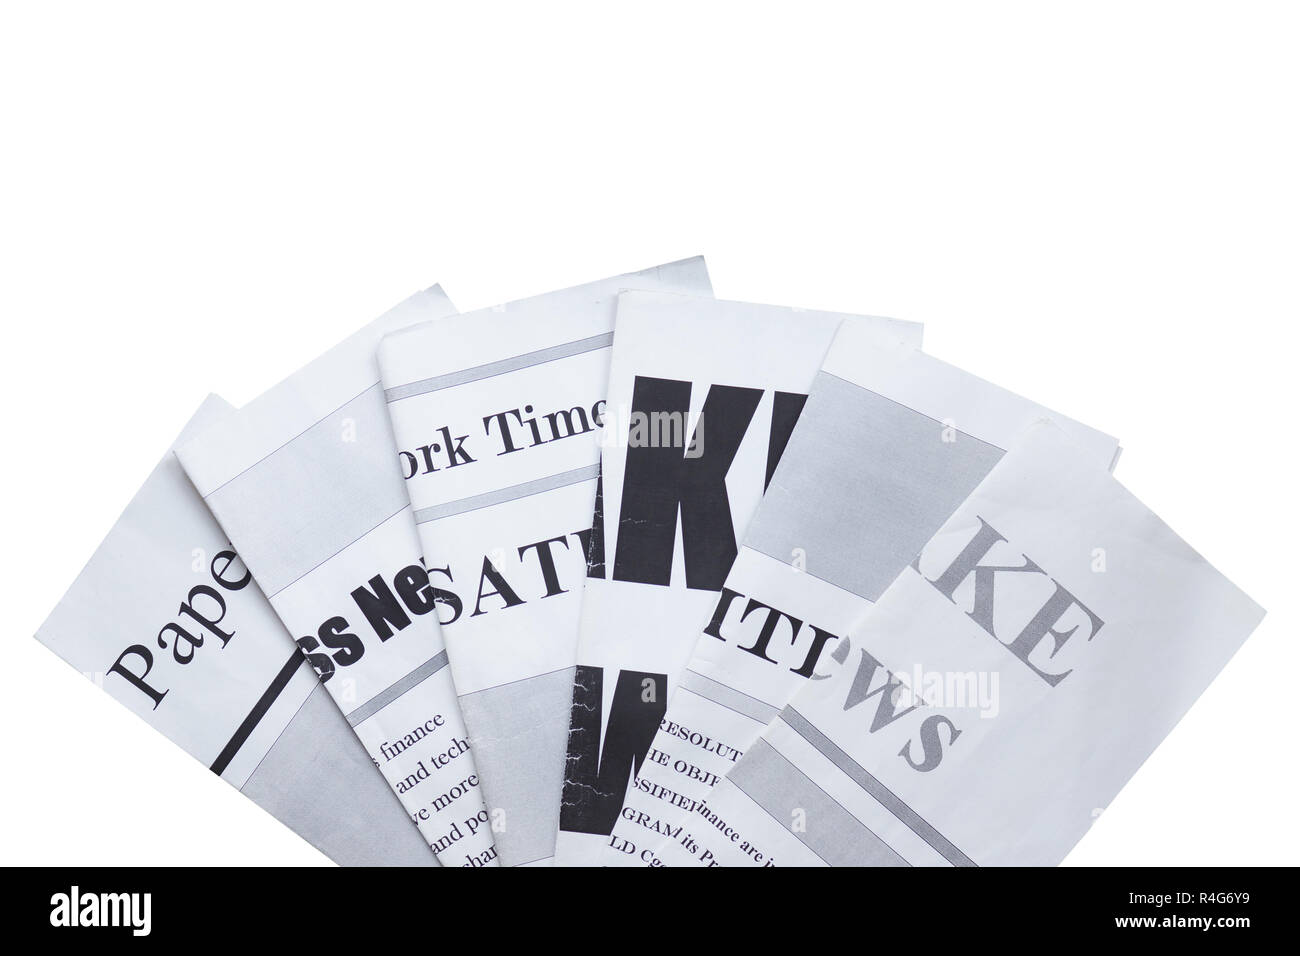 Bunch of newspapers with headlines and articles isolated on white background Stock Photo